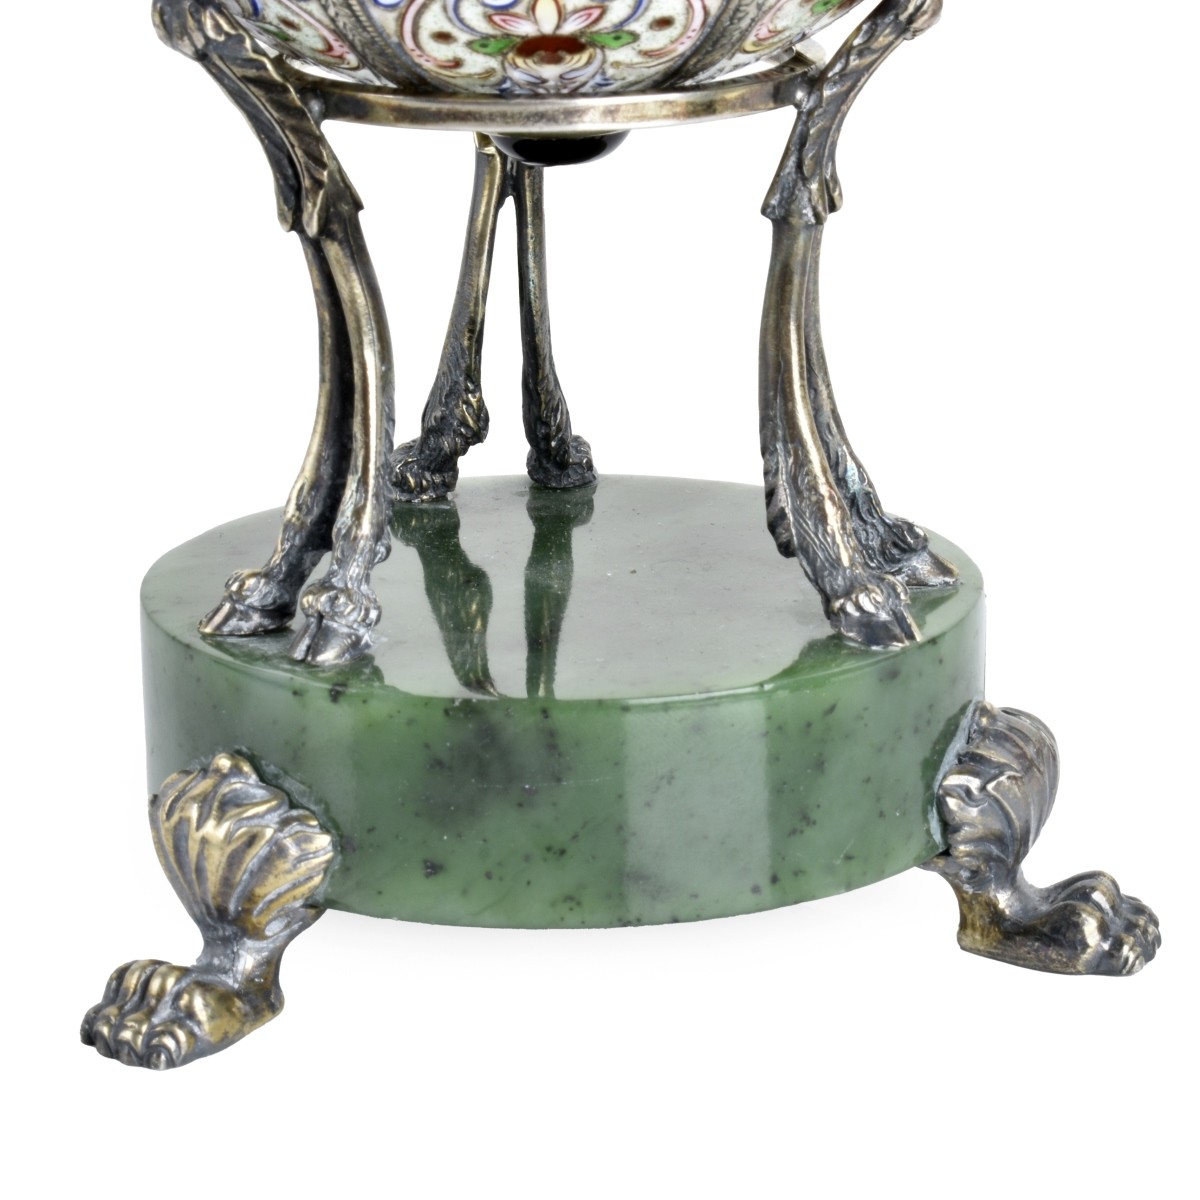 Russian Enamel Silver Egg and Stand